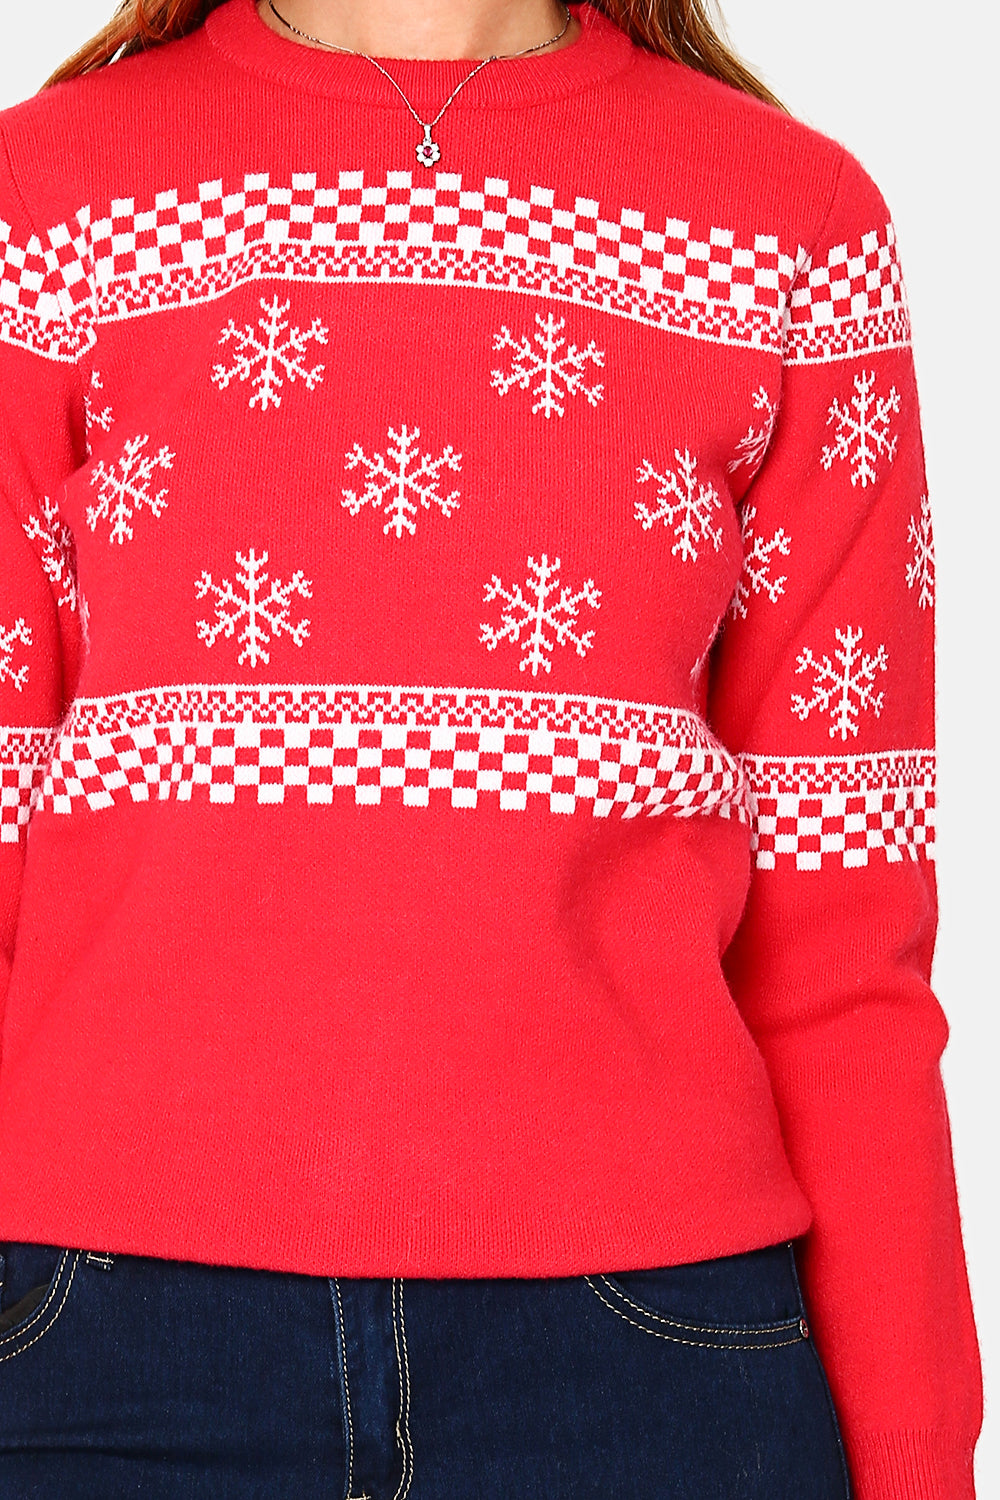 Fancy knit Christmas sweater with round neckline